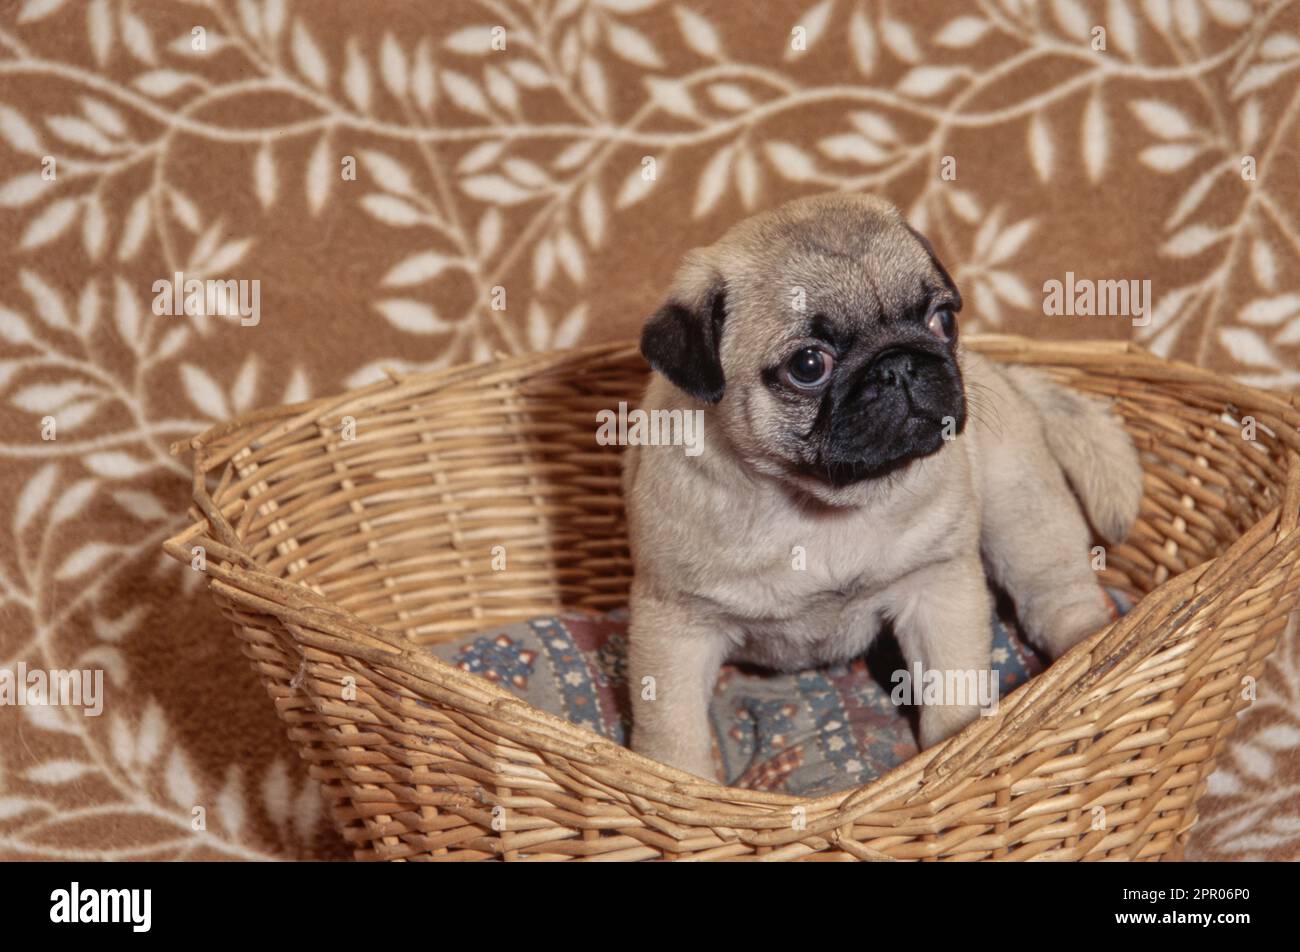 Pug puppy sitting in wicker dog beg on brown blanket with leaves design Stock Photo